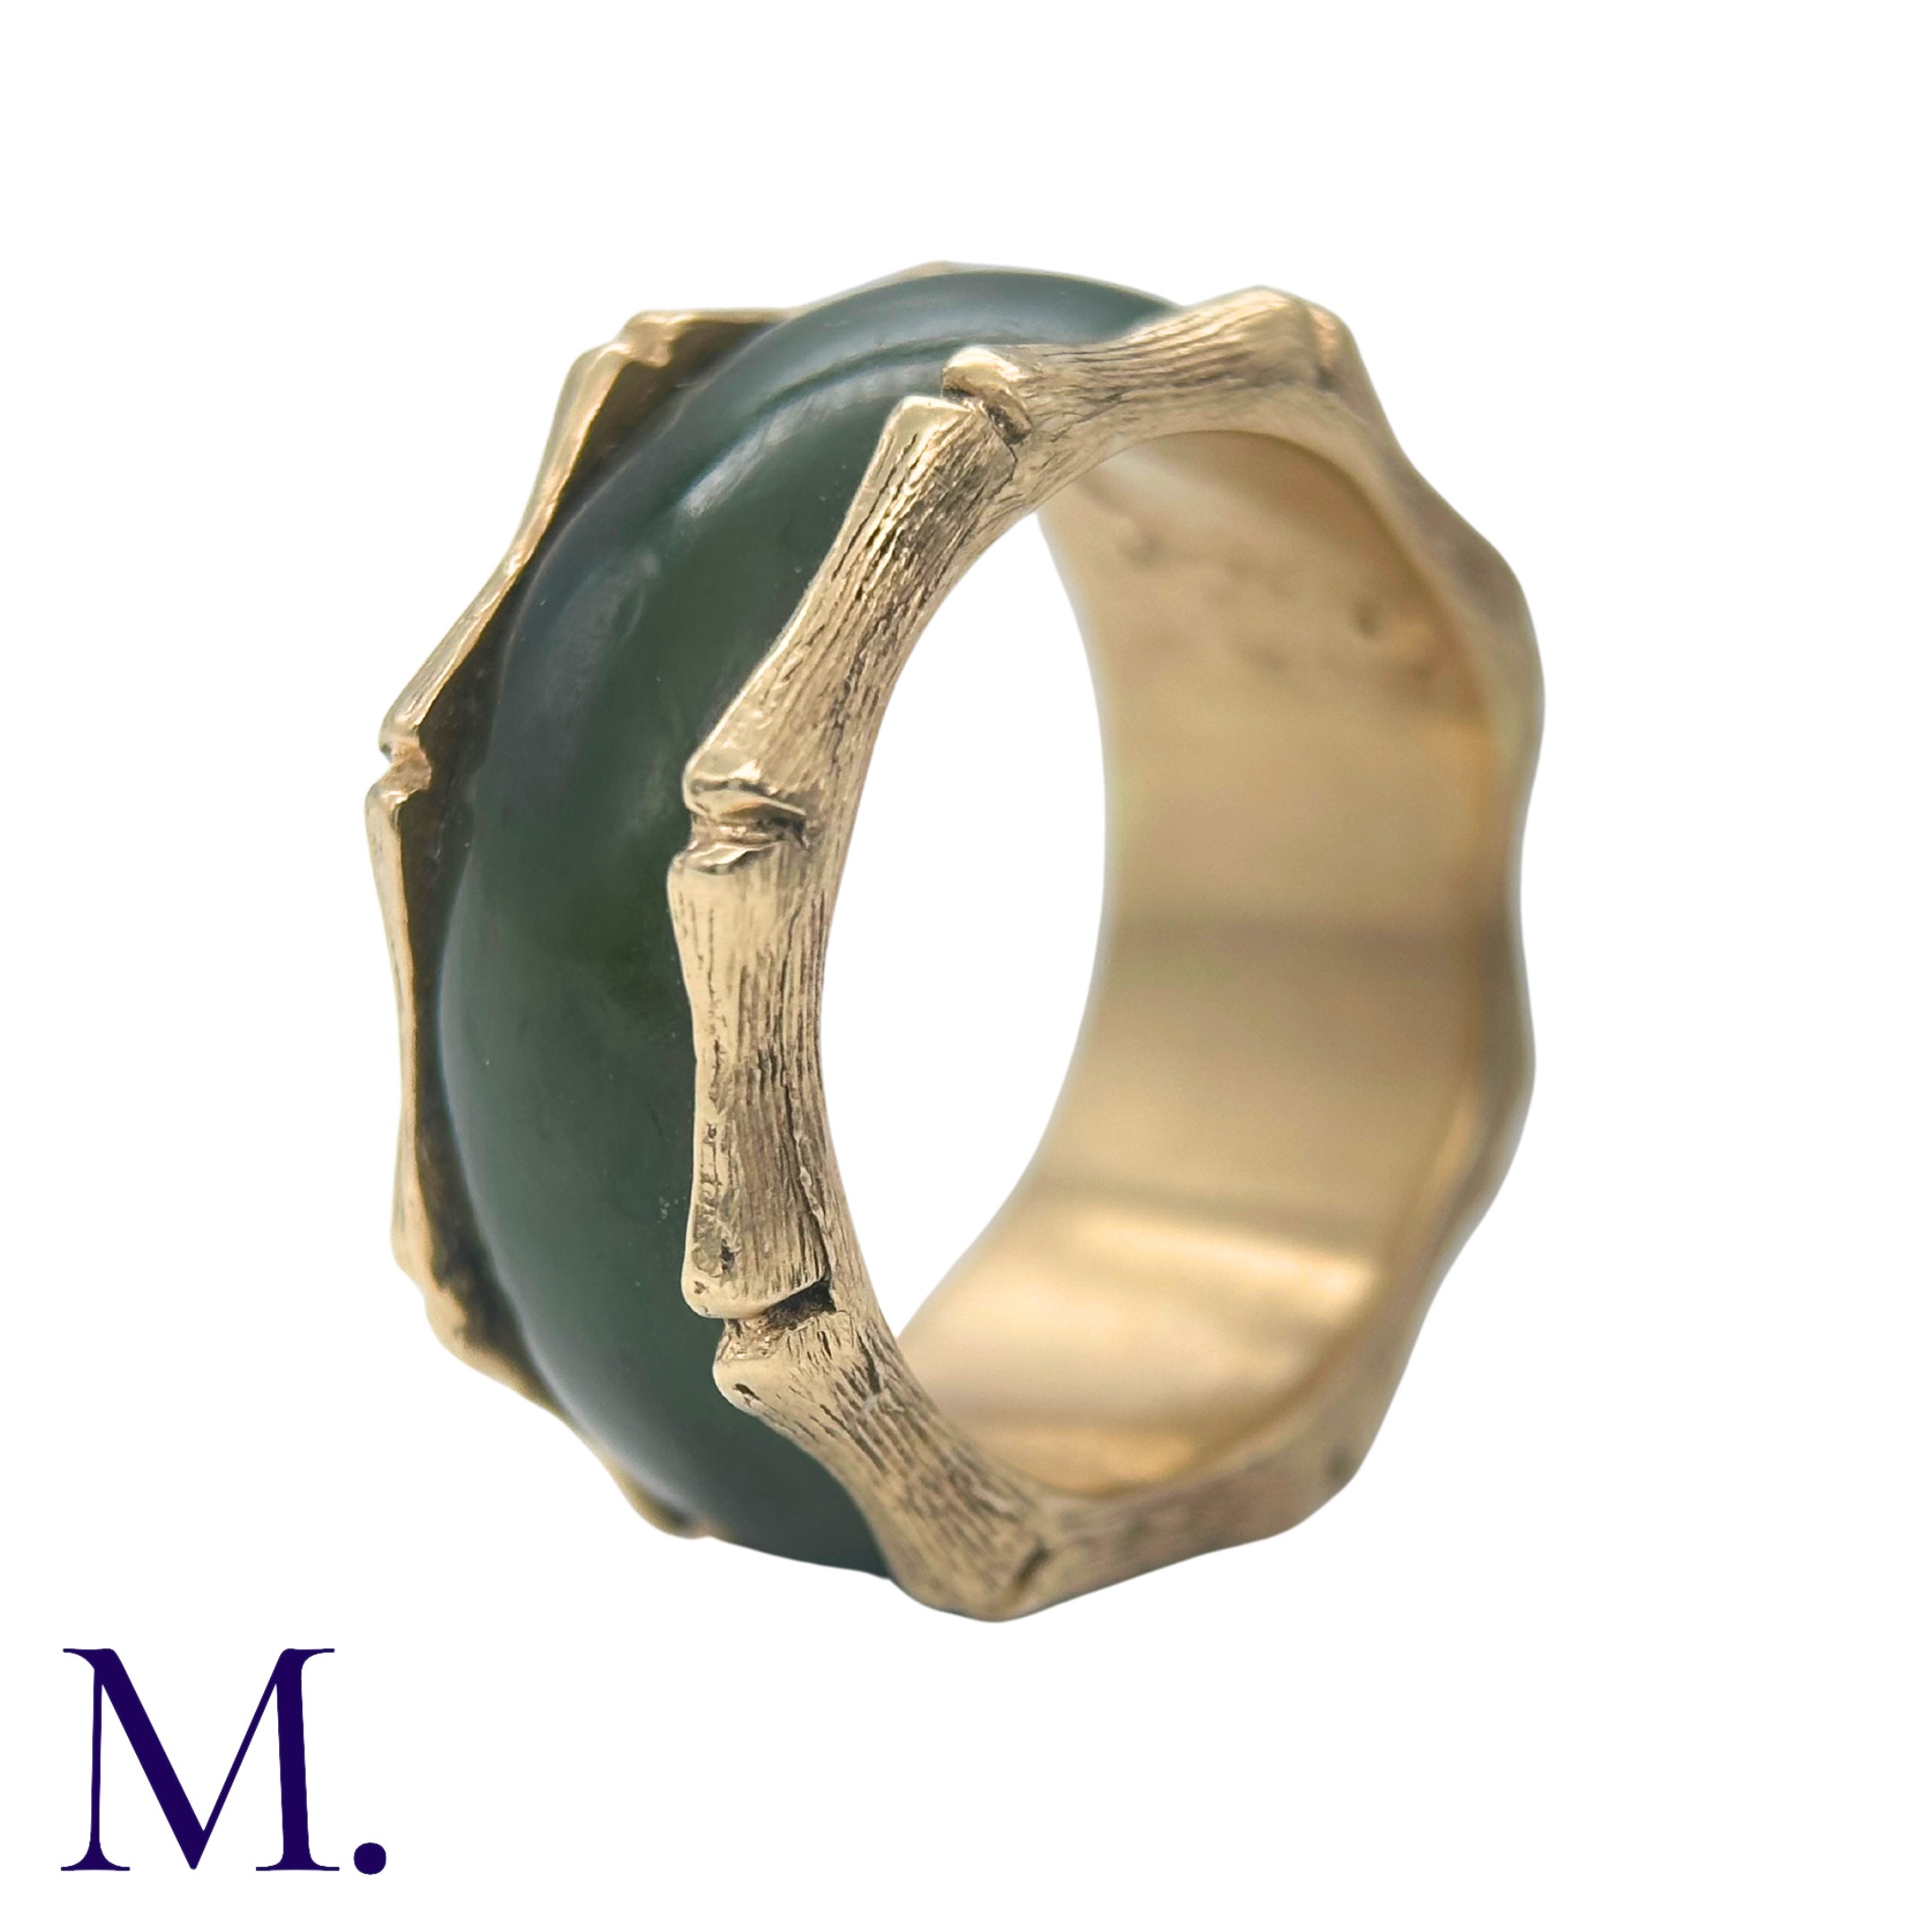 A Nephrite and Gold Ring in 14K yellow gold. The continuous nephrite band encircles the band with - Image 4 of 5